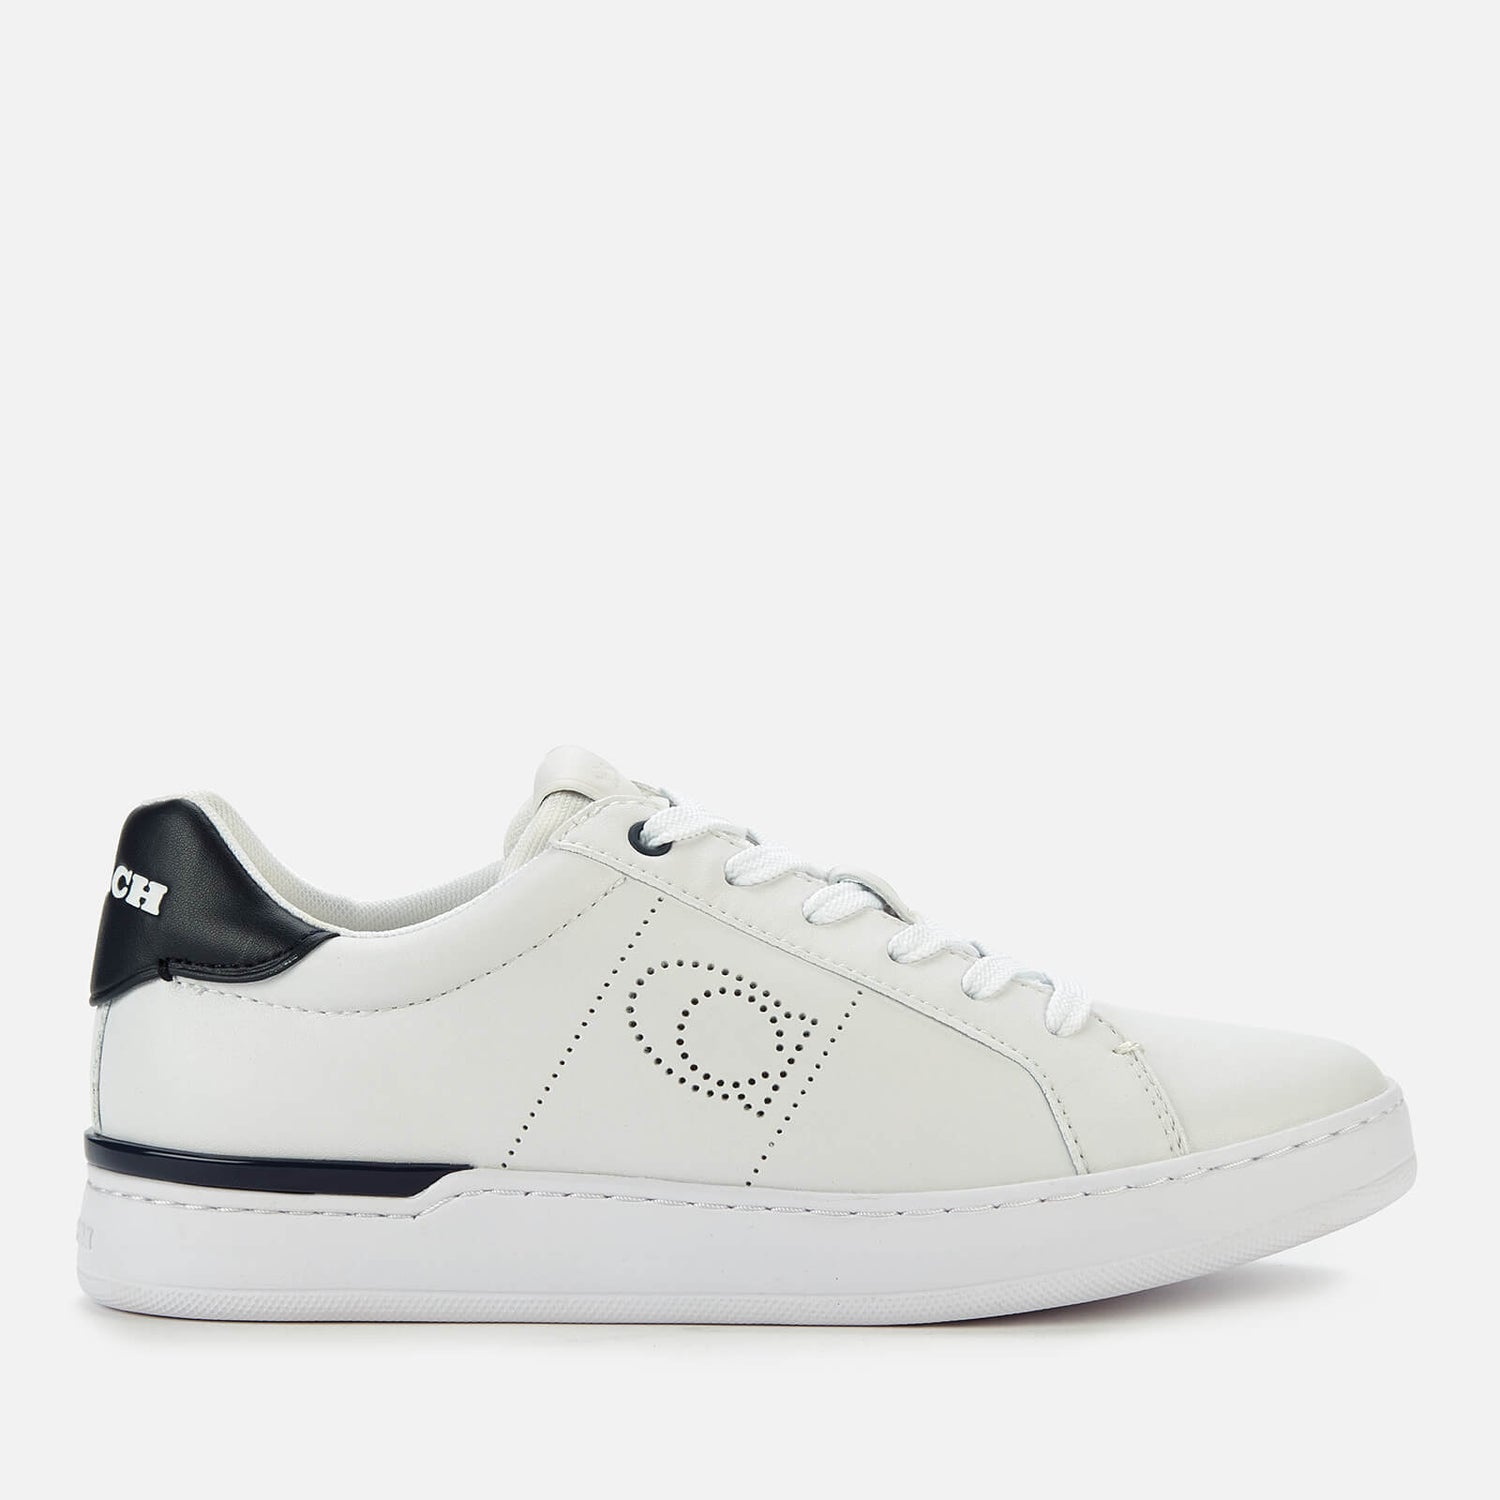 Coach Women's Lowline Leather Cupsole Trainers - Optic White/Midnight Navy - UK 3